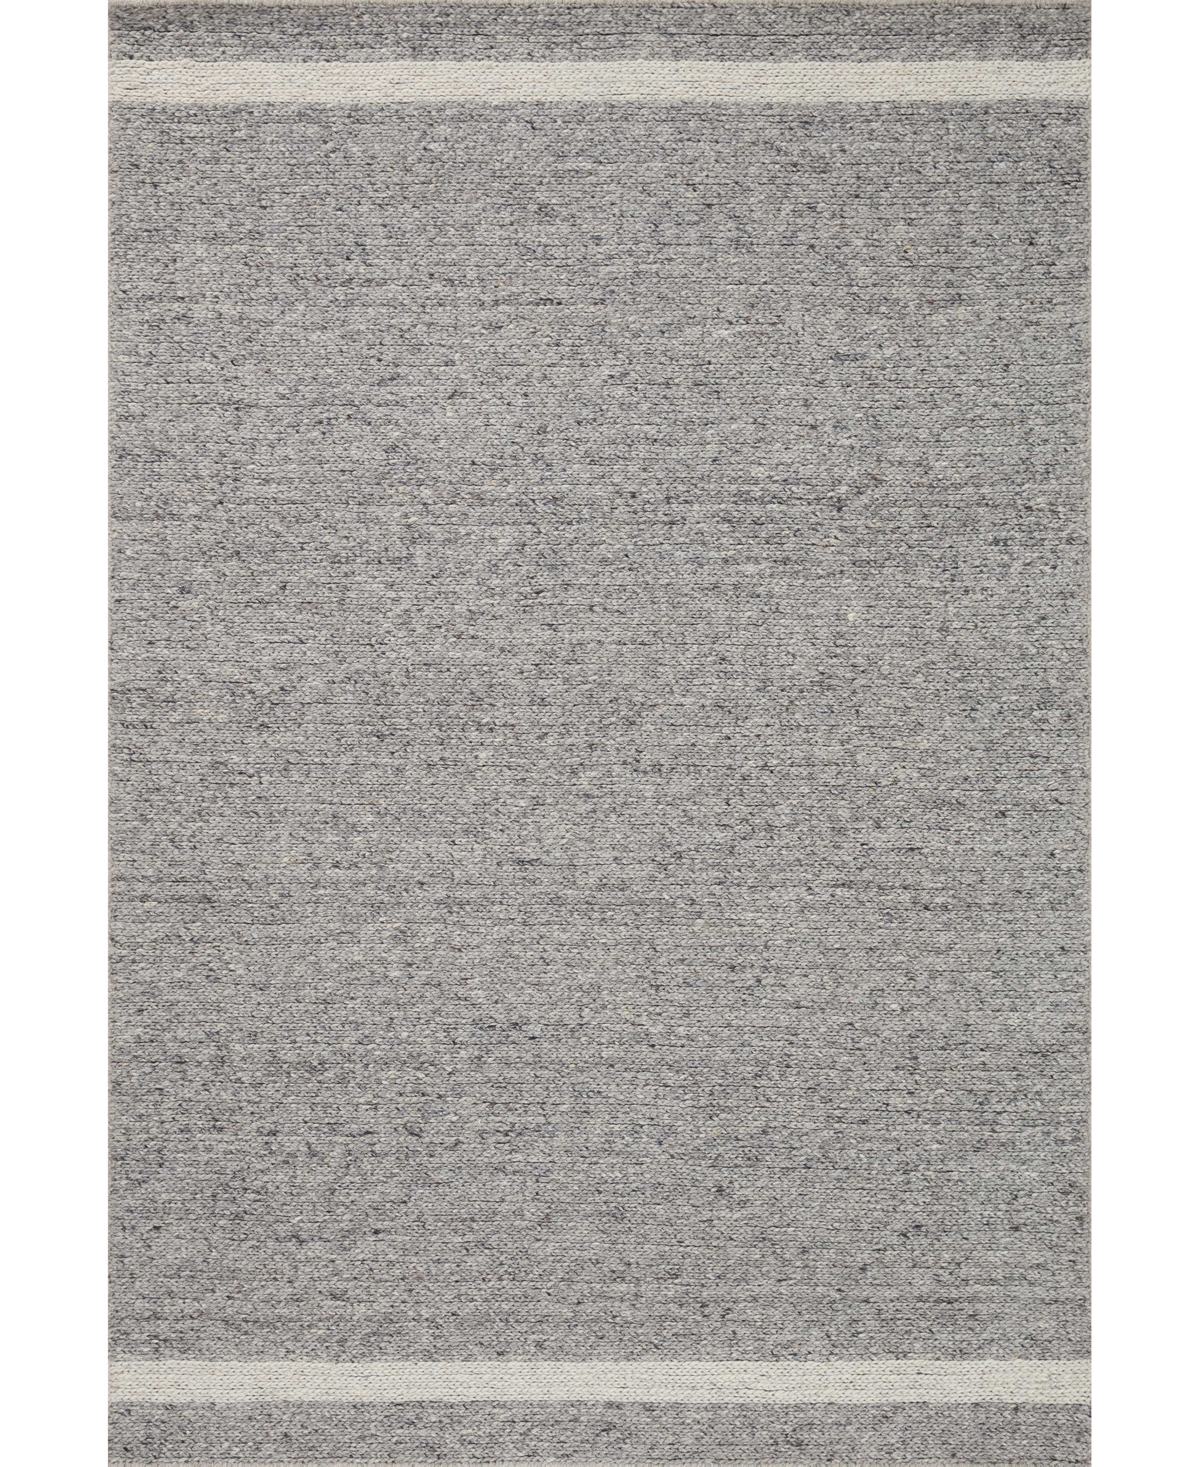 Magnolia Home By Joanna Gaines X Loloi Ashby Ash-04 3'6" X 5'6" Area Rug In Slate